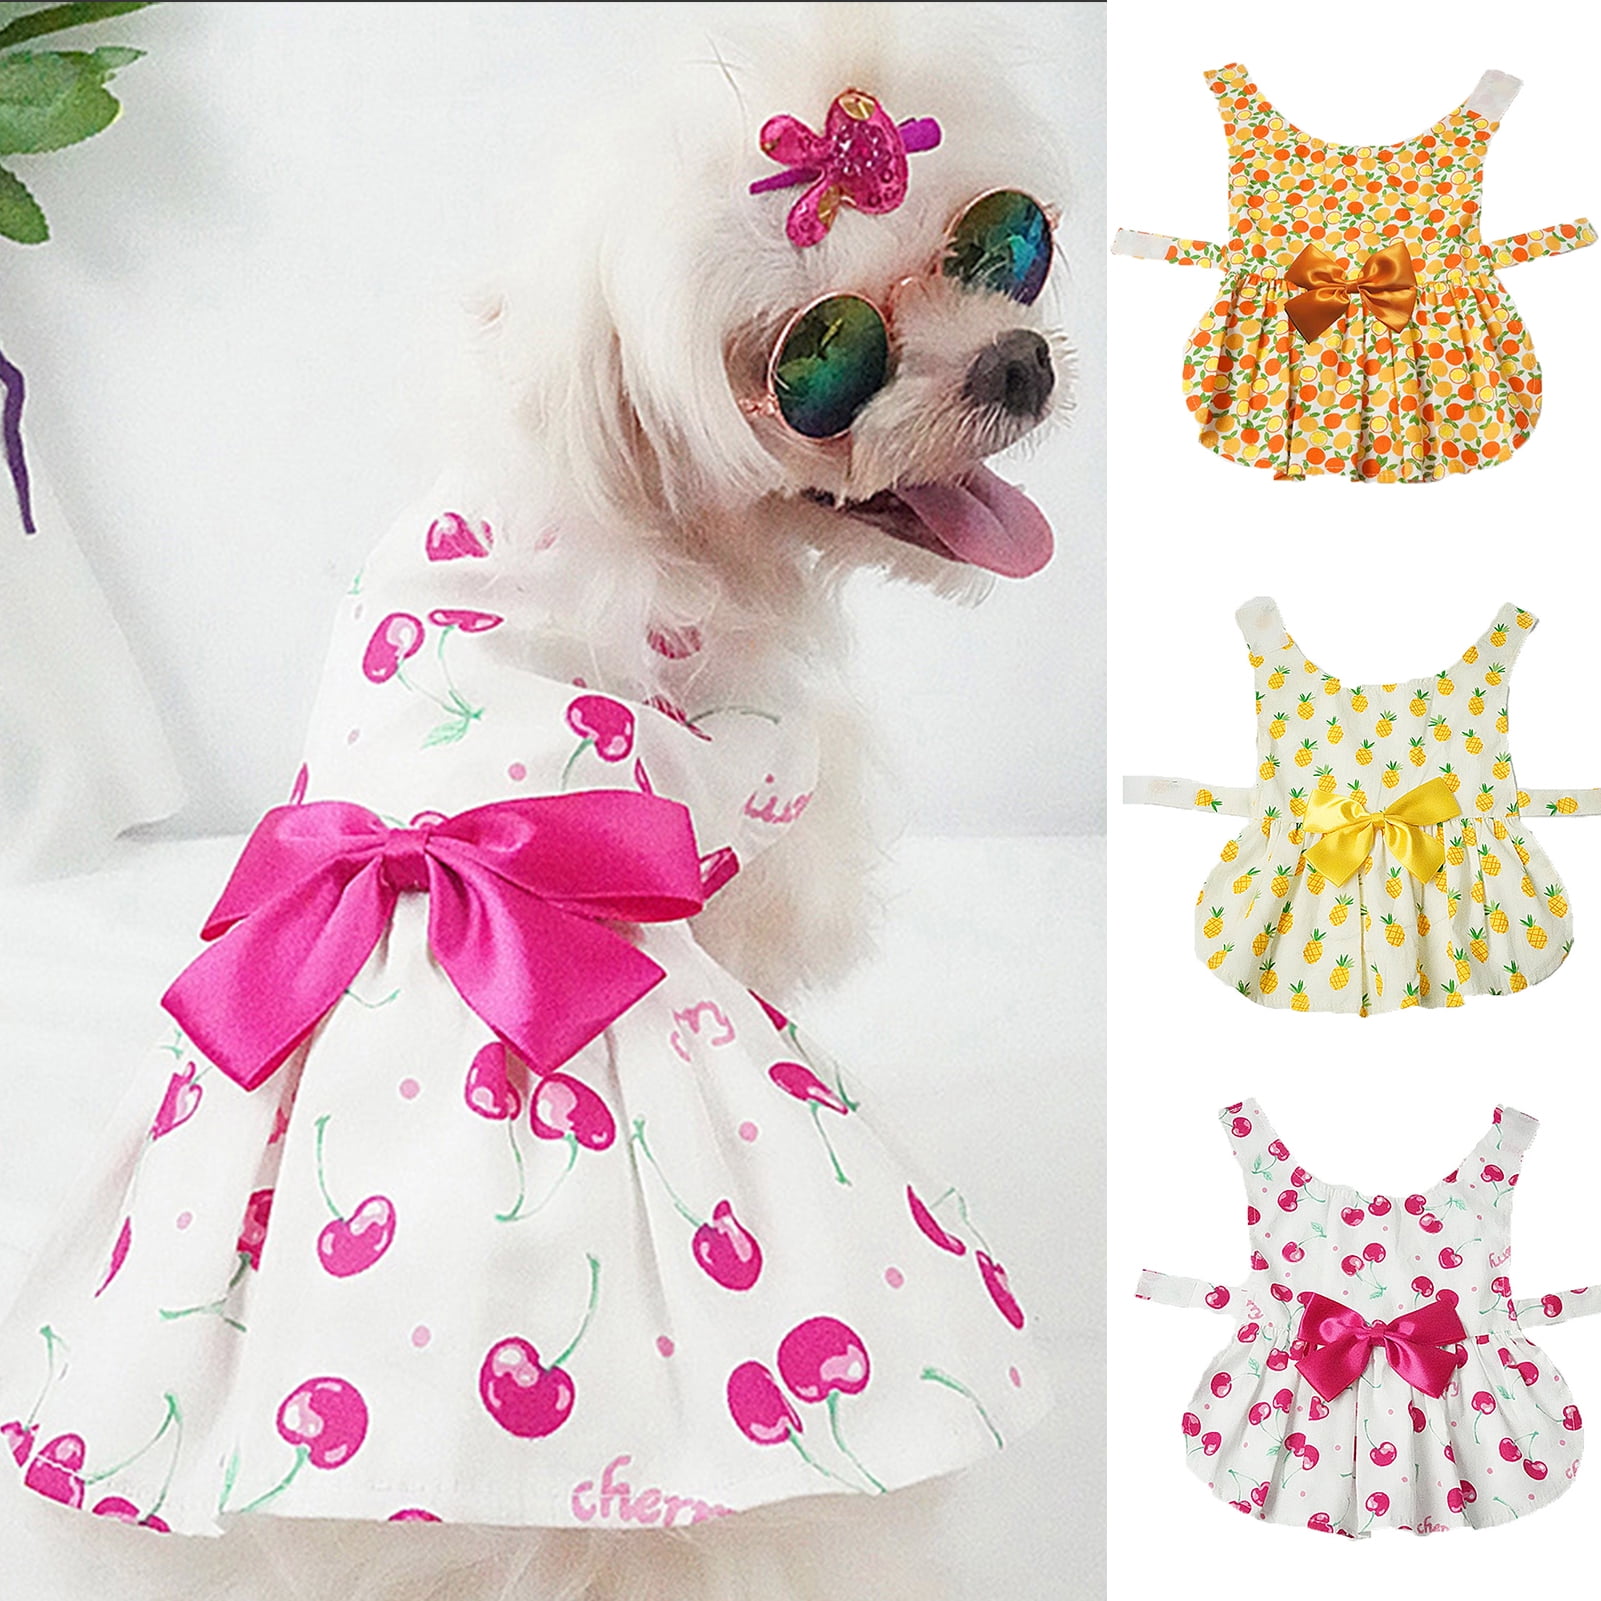 TONY HOBY Fashion Colorful Stripe Pet Clothes for Dog Dress Cat Sundress for Summer with Cute Bow Violet